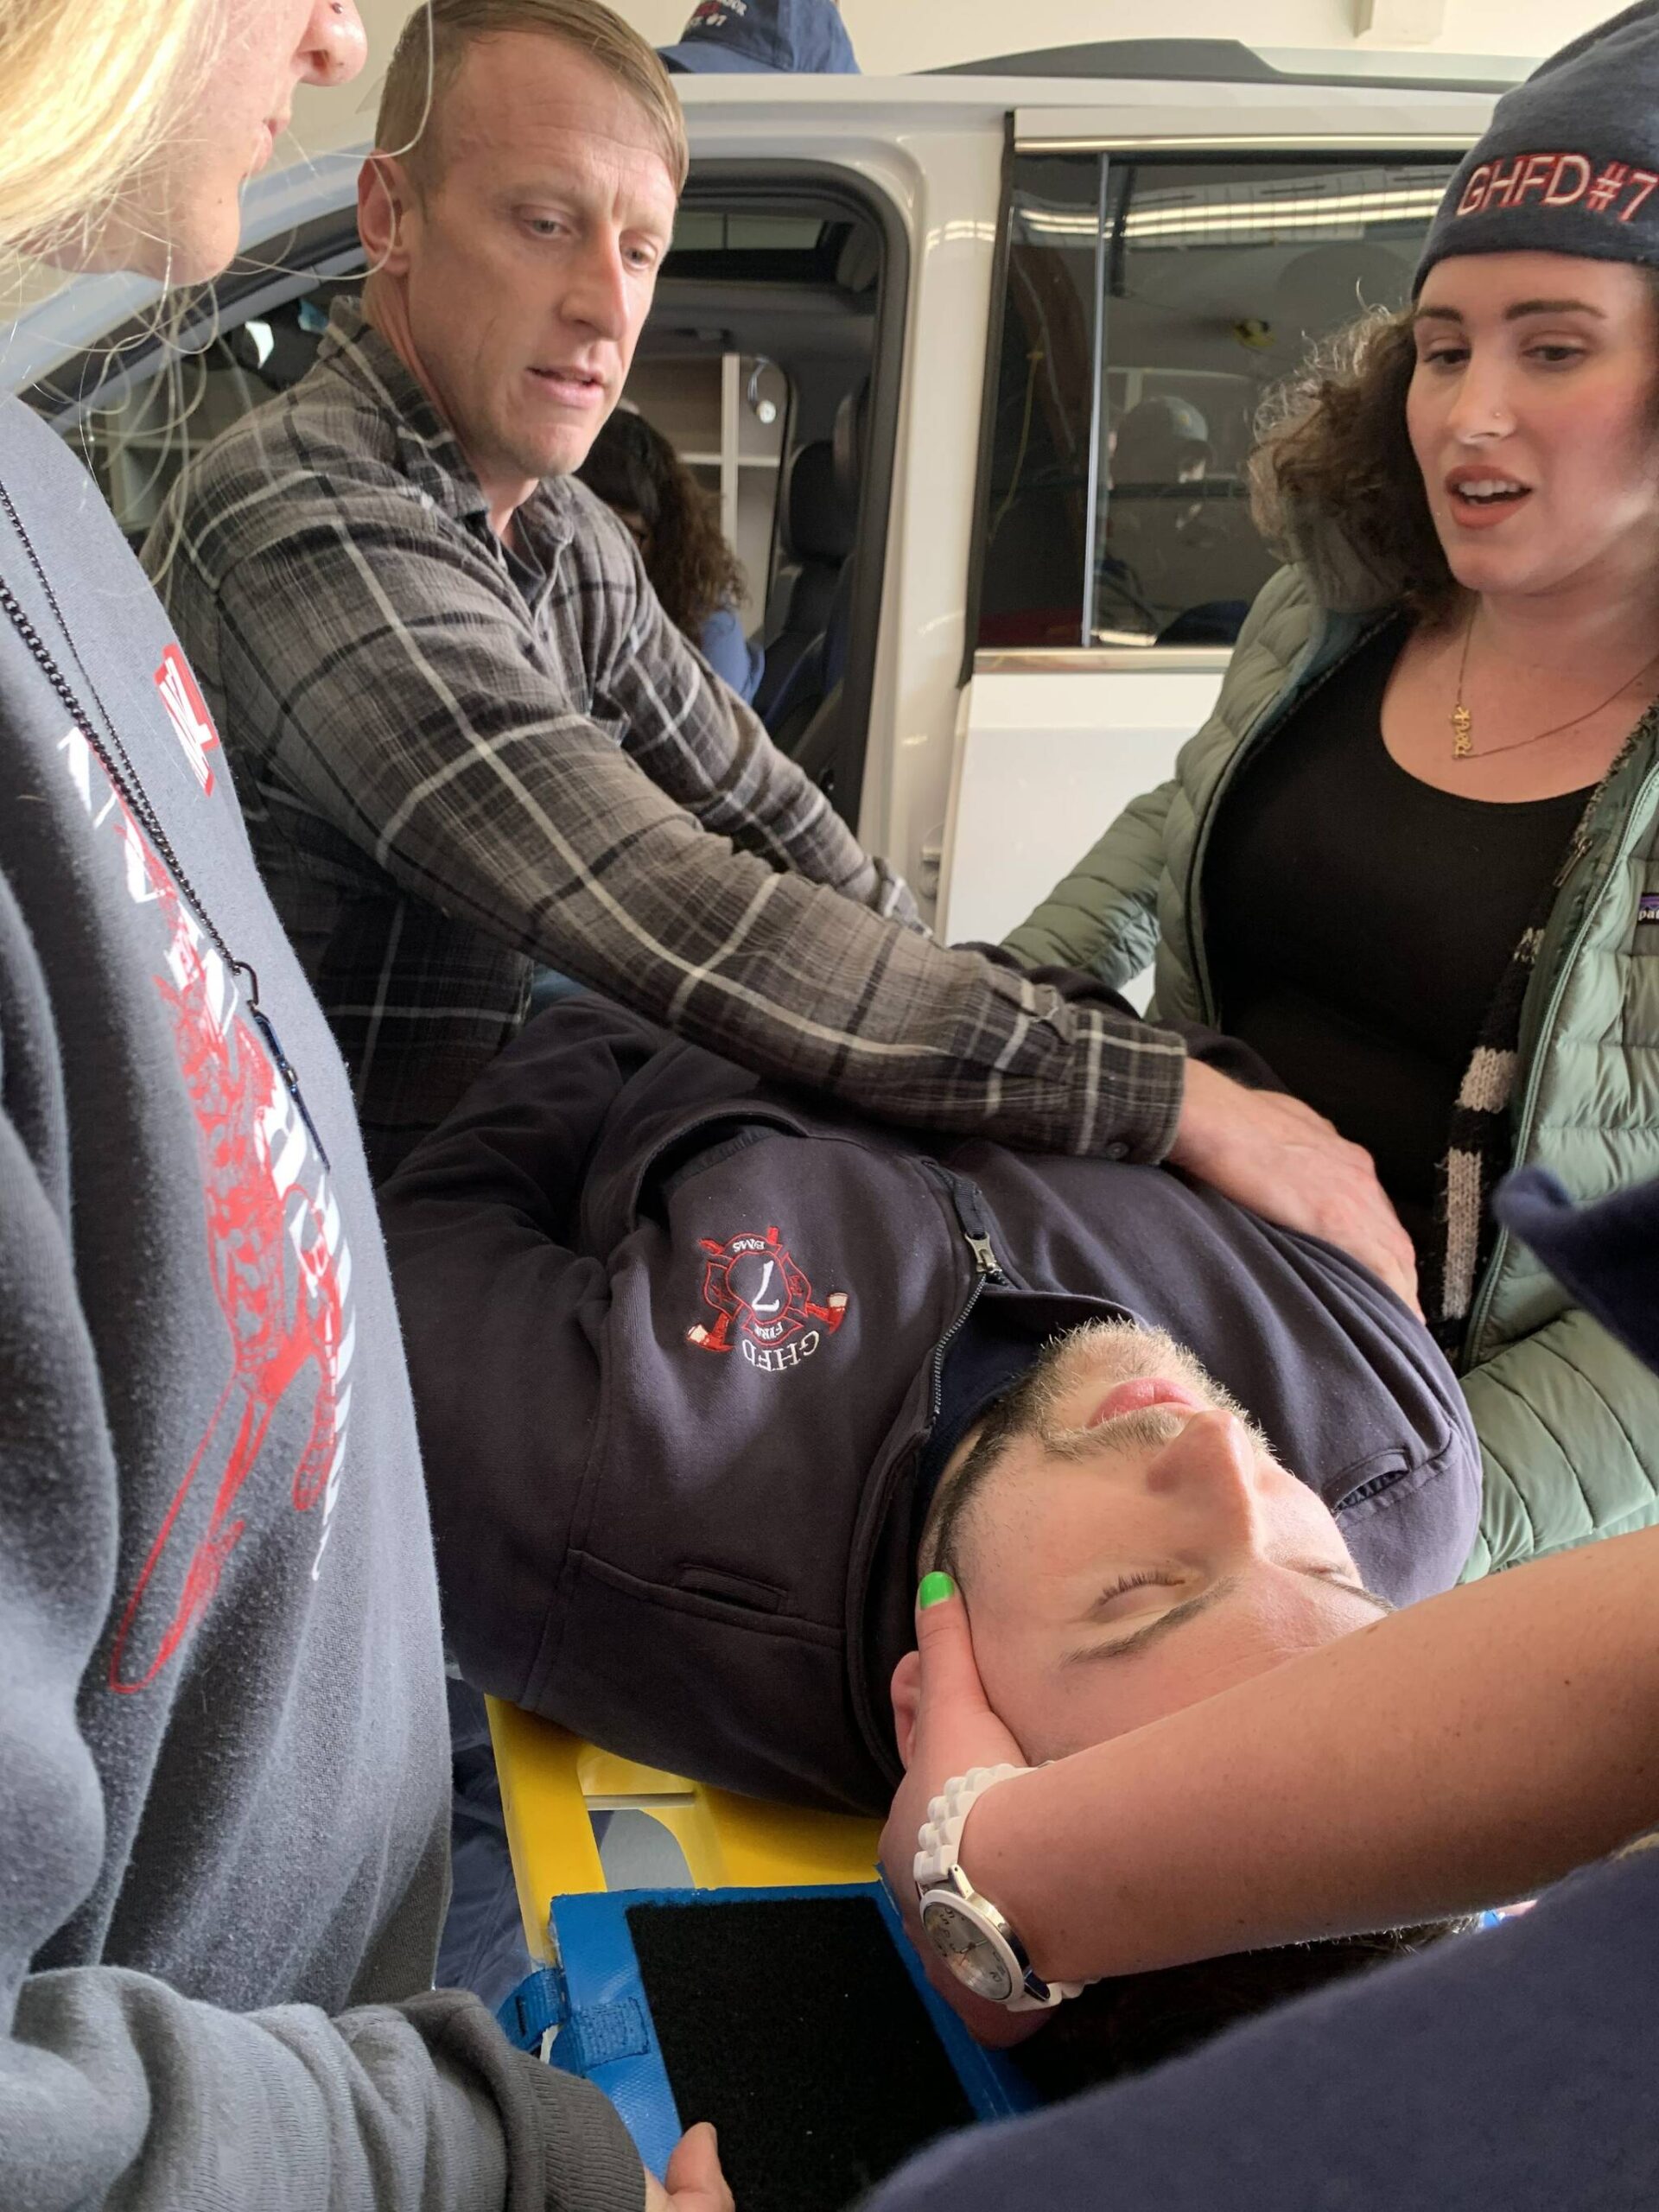 Students in the county’s EMT certification course practice removing a patient from a vehicle on March 23. (Hoquiam Fire Department)